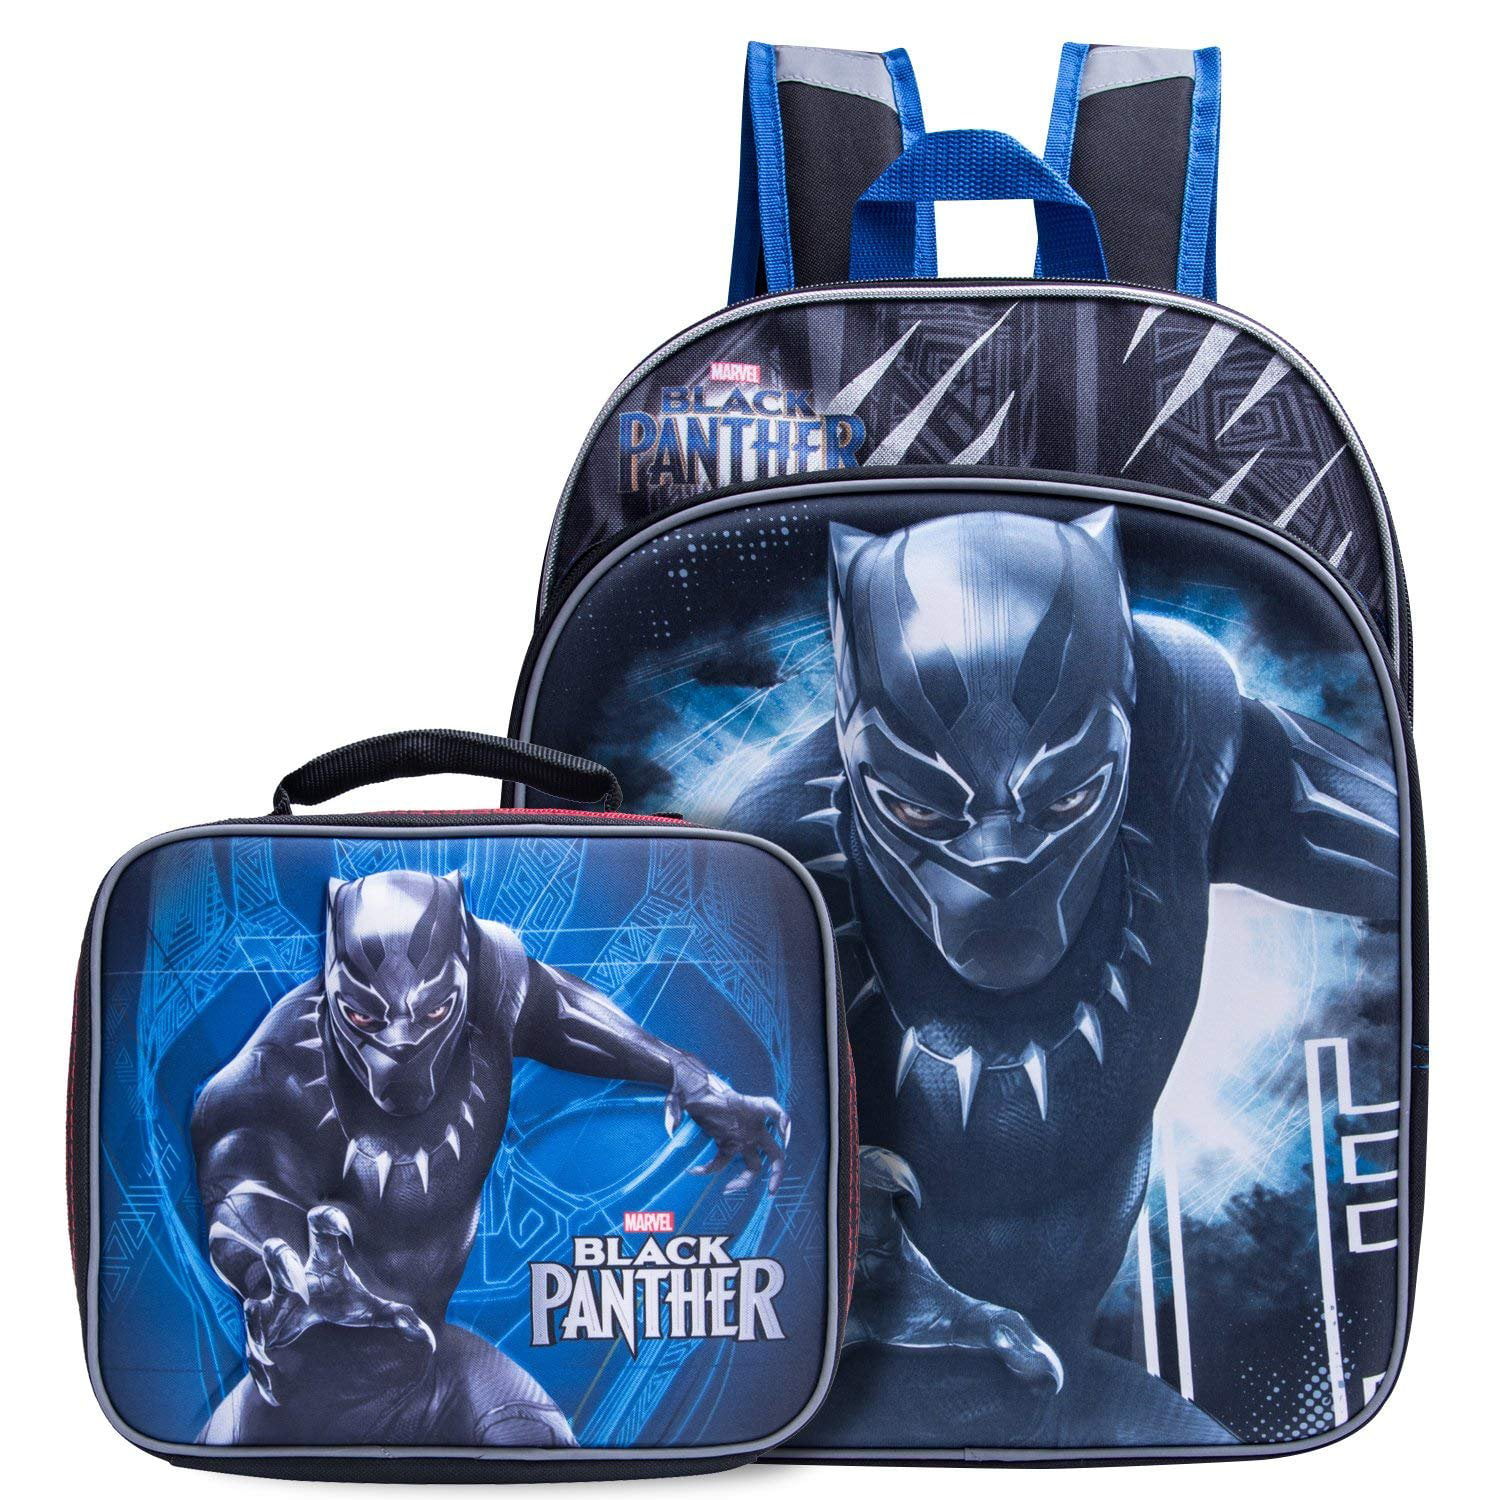 Tin Box Company Black Panther Helmet Arch Lunch Box, 1 Unit - Smith's Food  and Drug